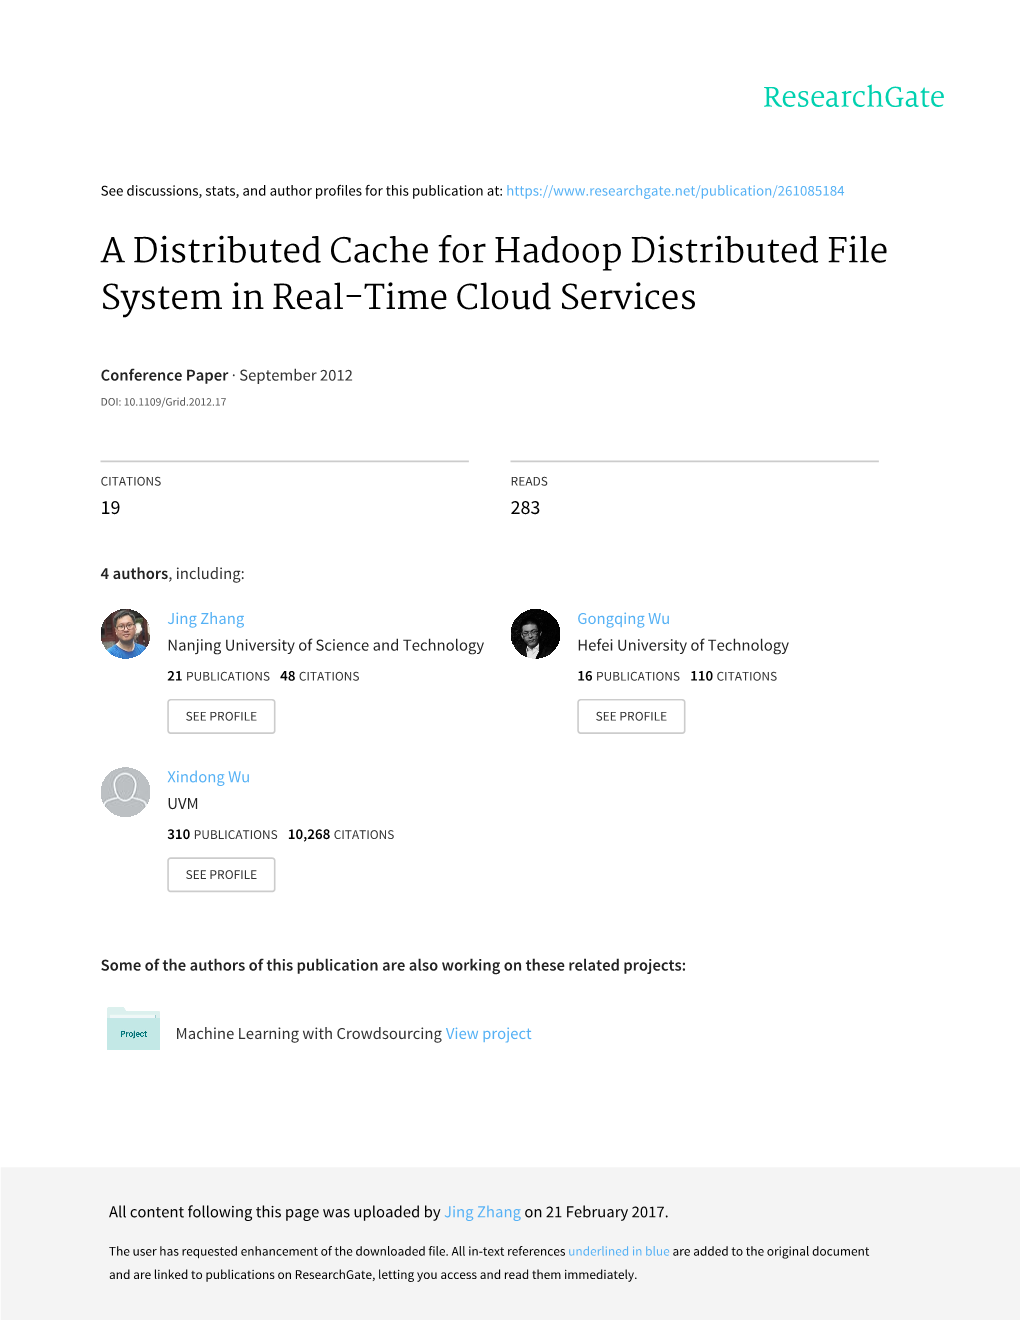 A Distributed Cache for Hadoop Distributed File System in Real-Time Cloud Services